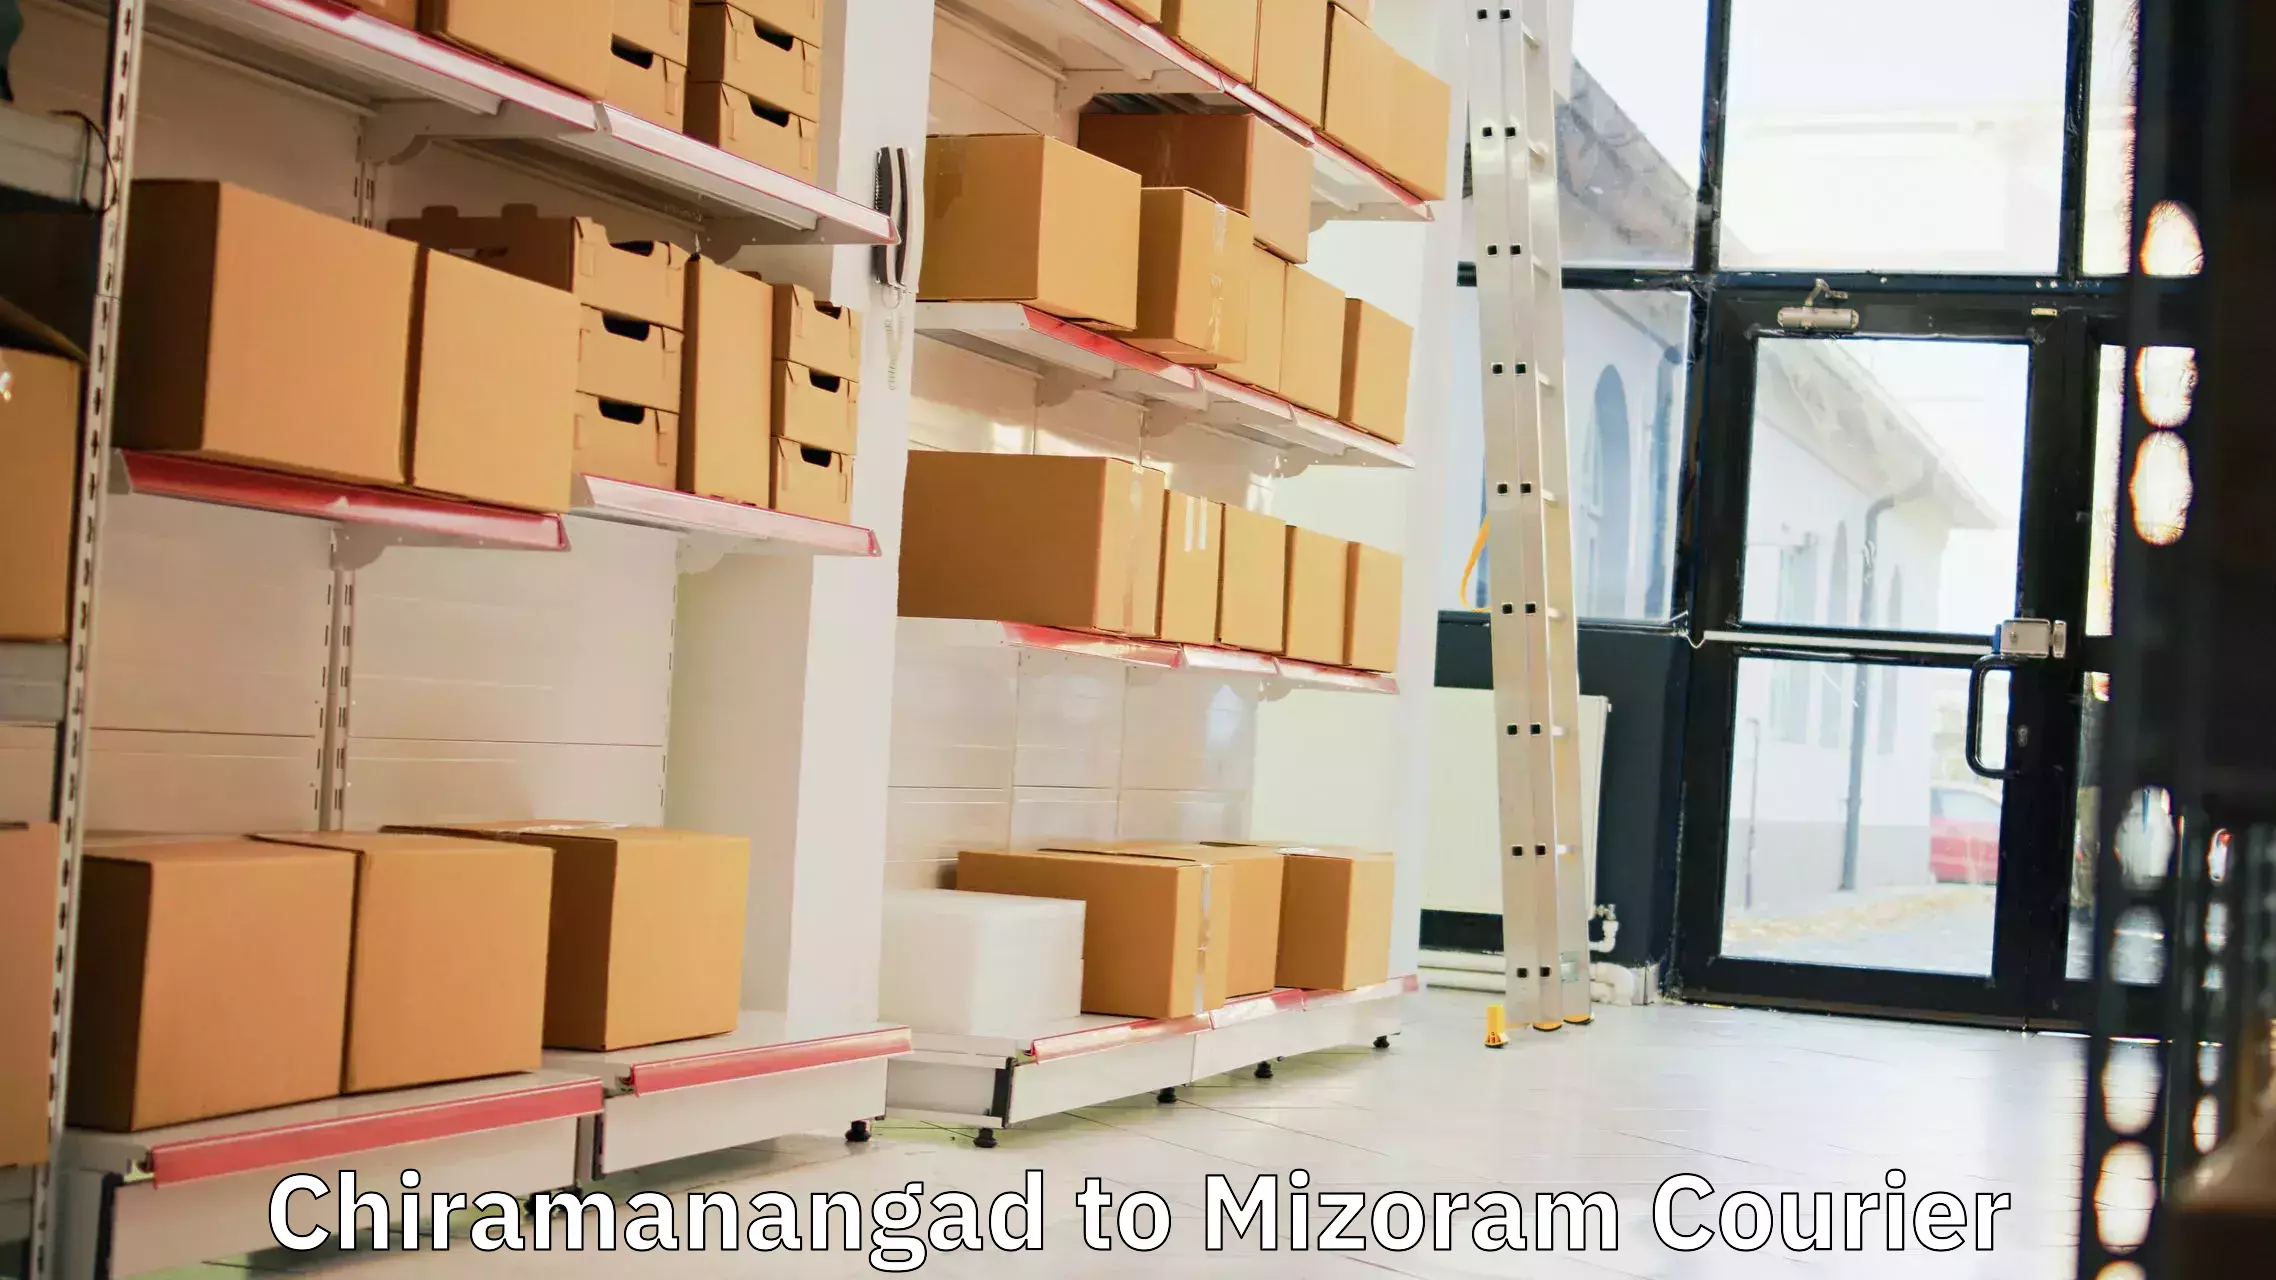 Express delivery solutions Chiramanangad to Mizoram